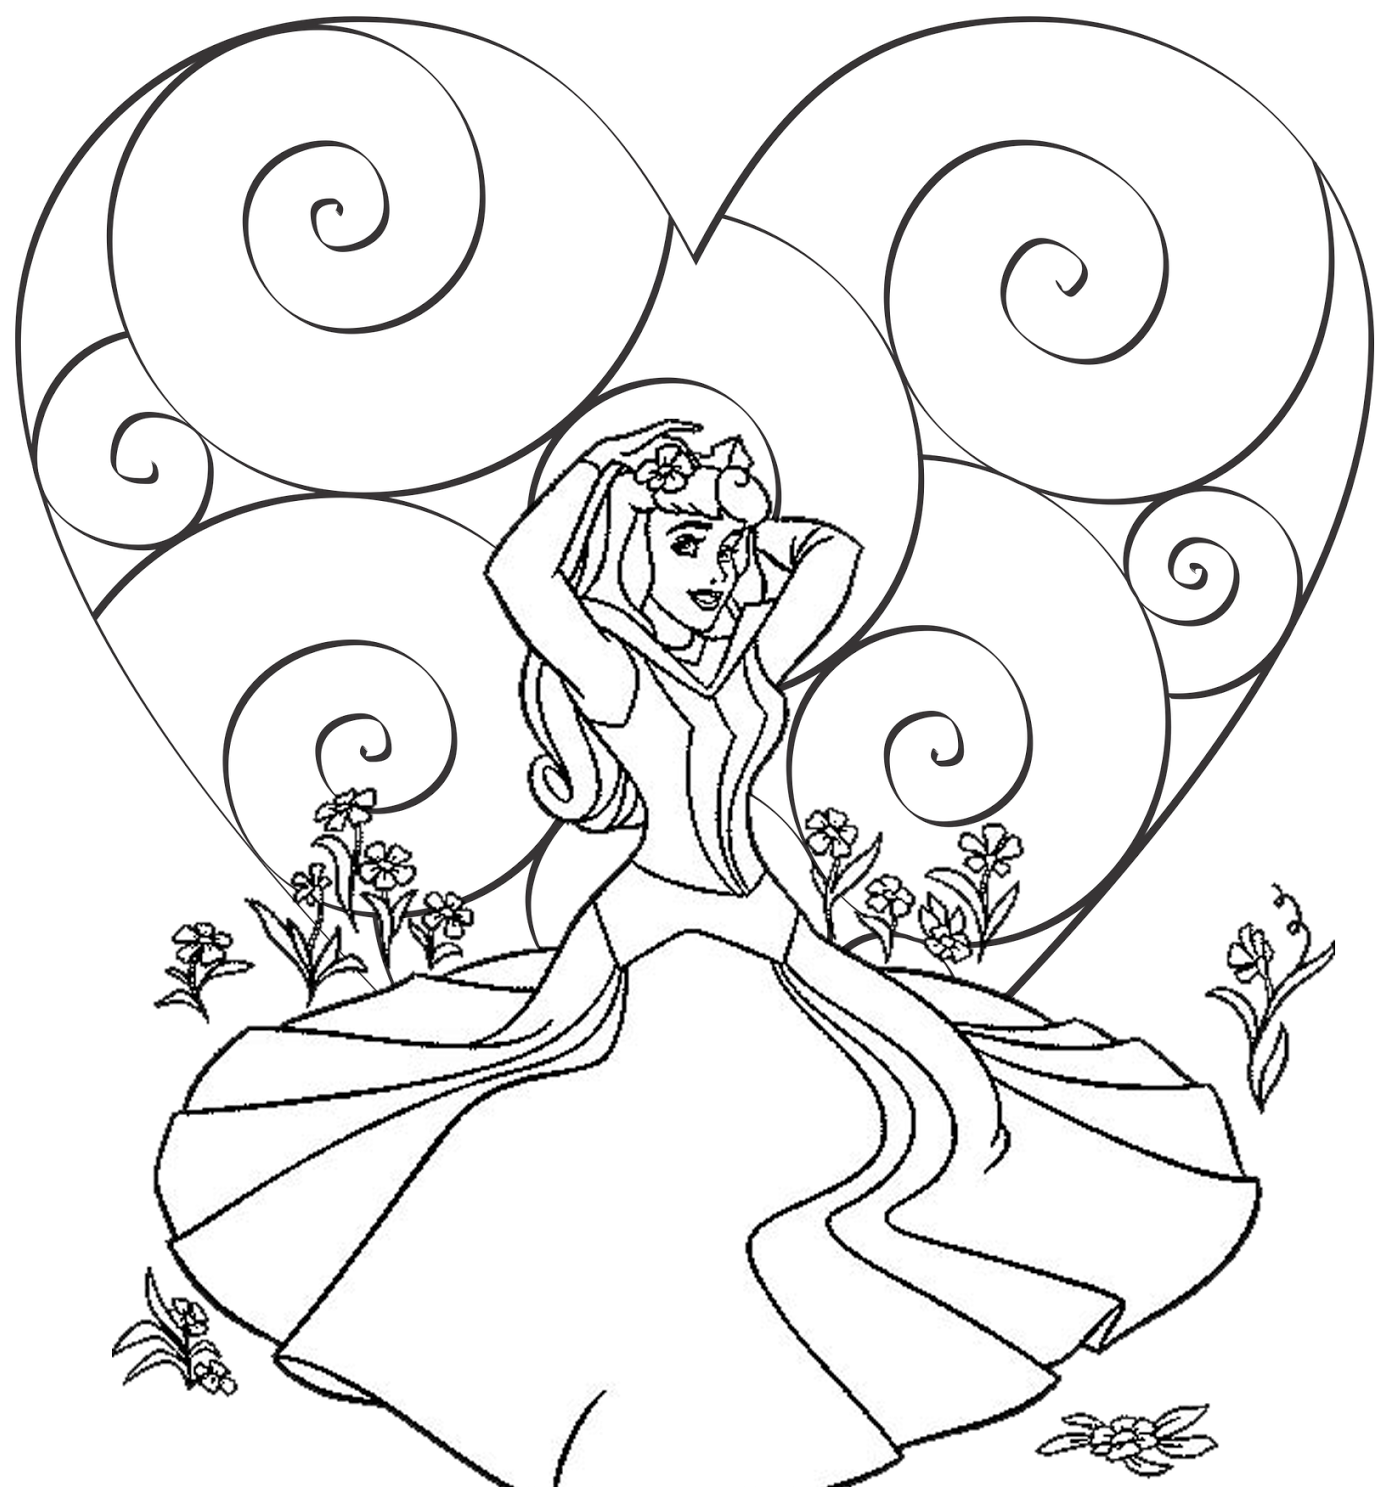 Free Printable Disney Coloring Pages Great - Coloring pages